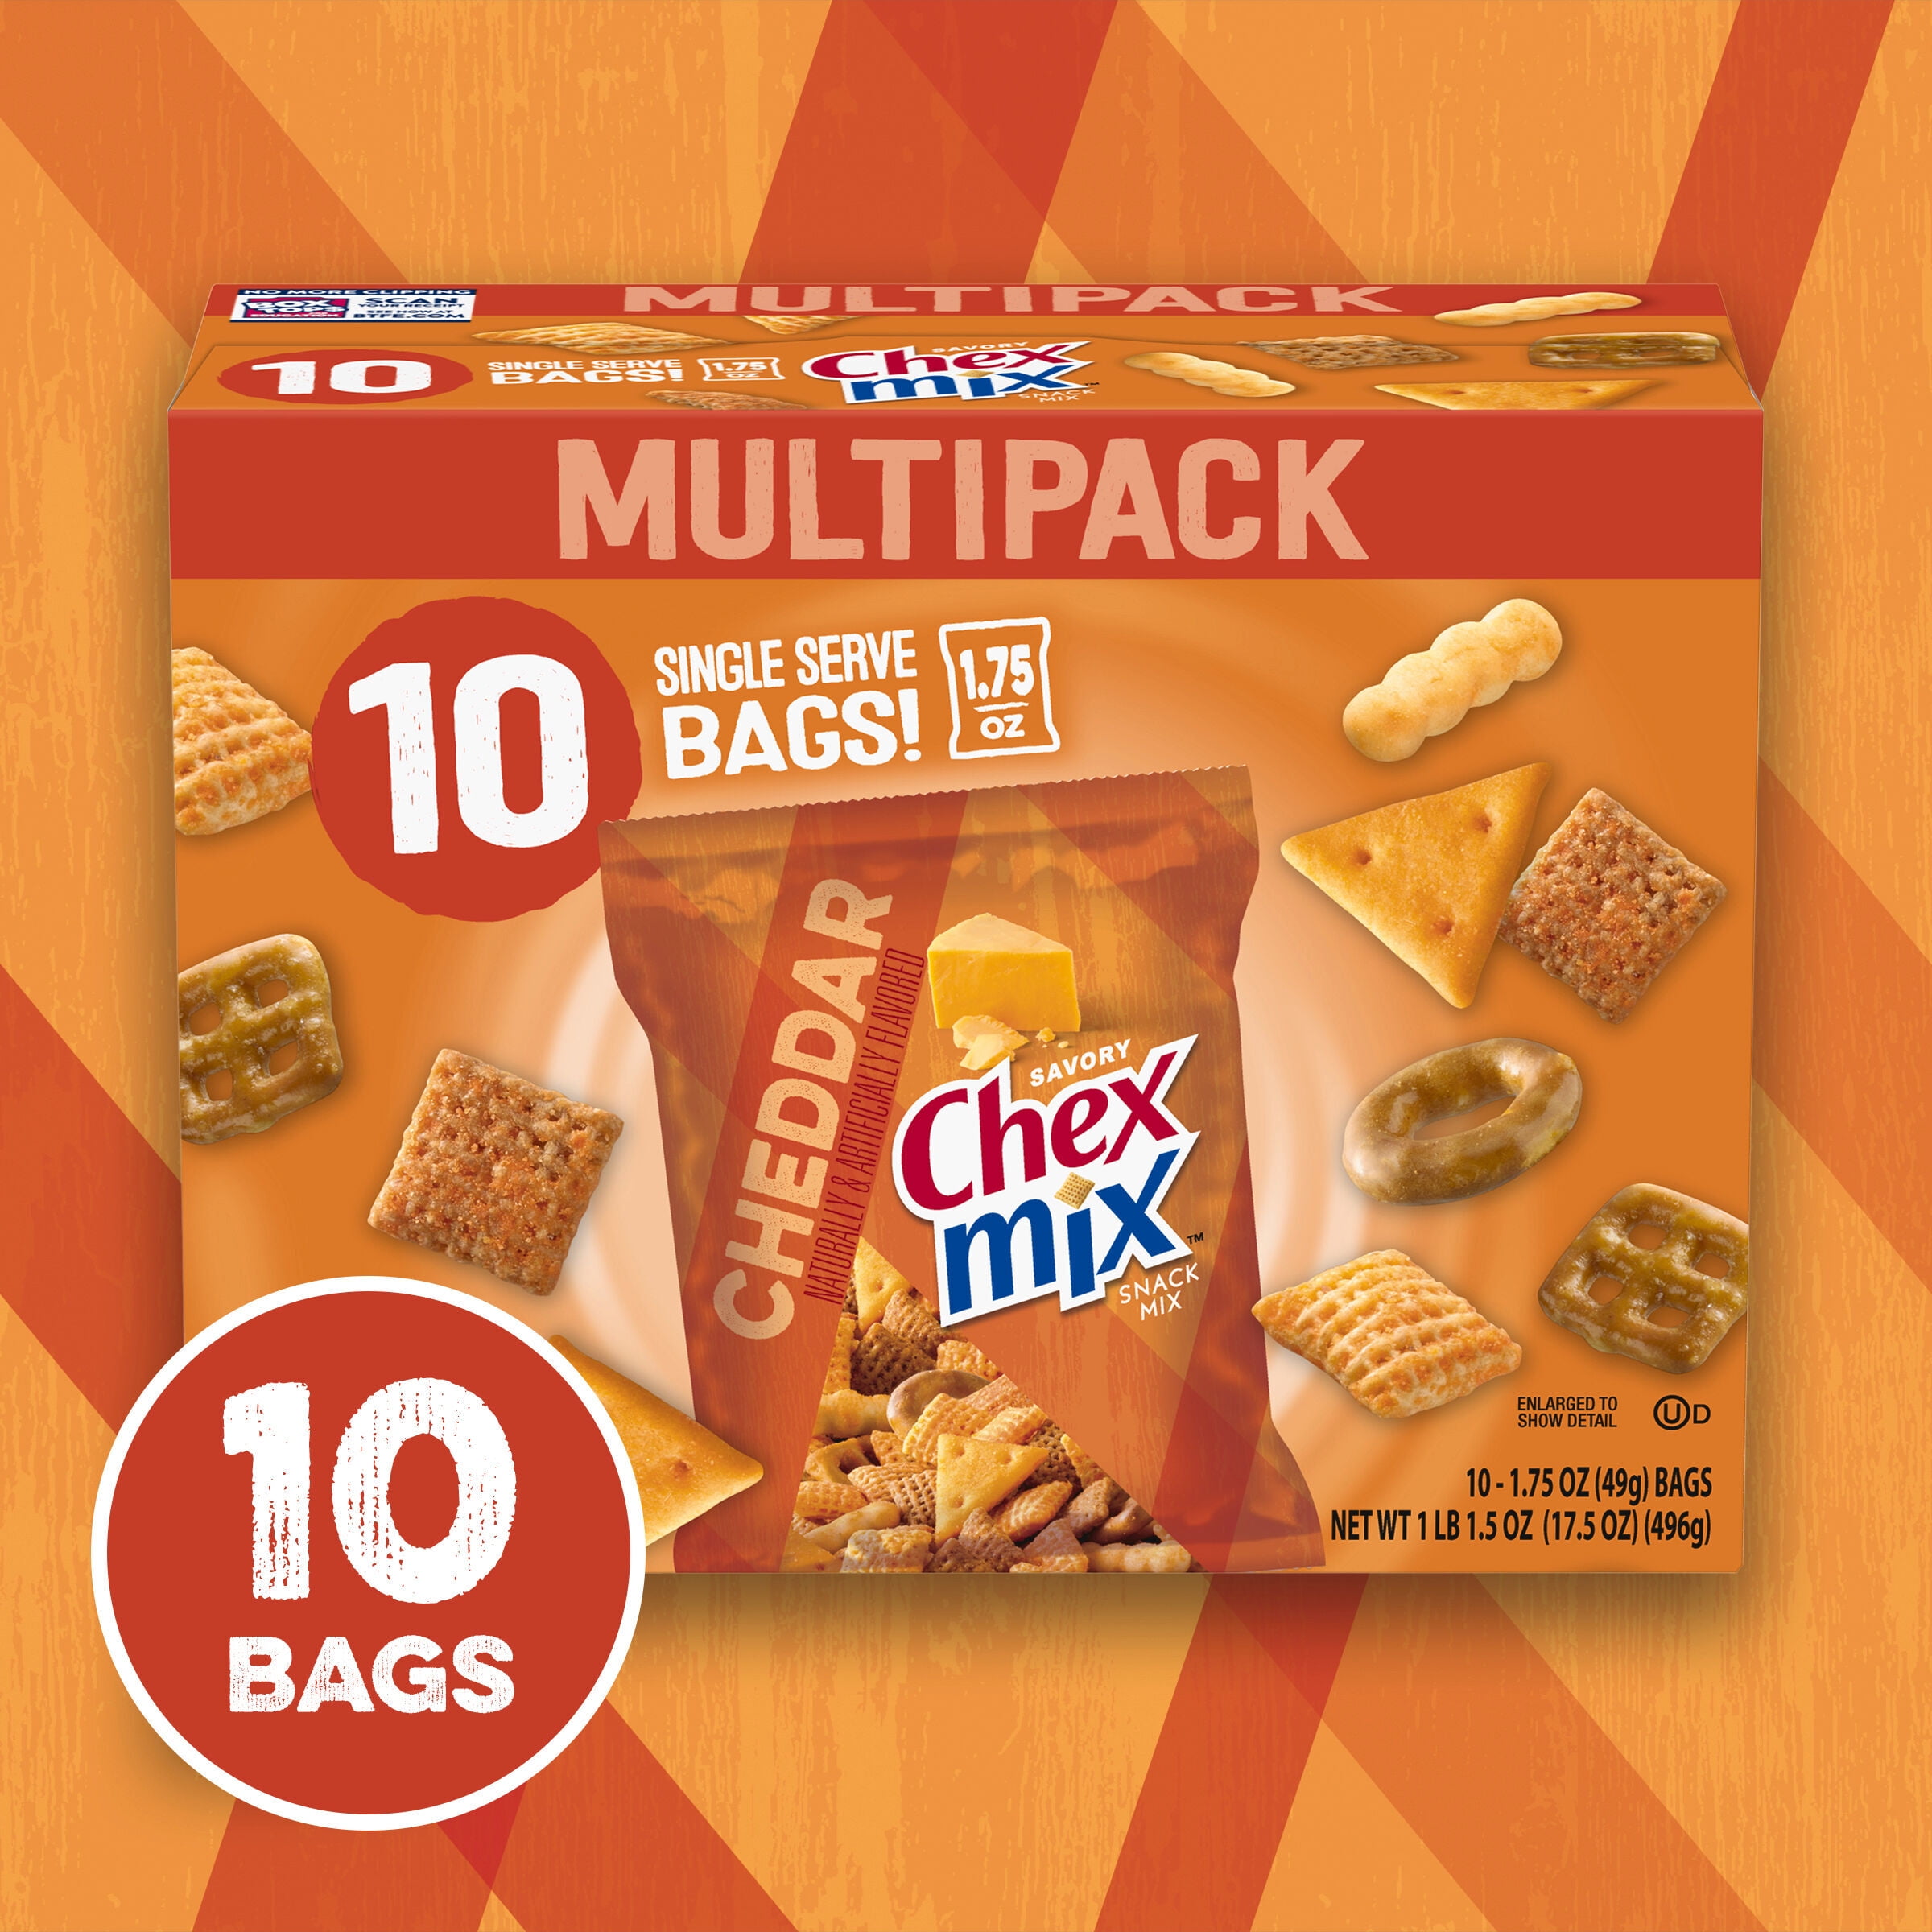 Chex Mix – Your Snack Box